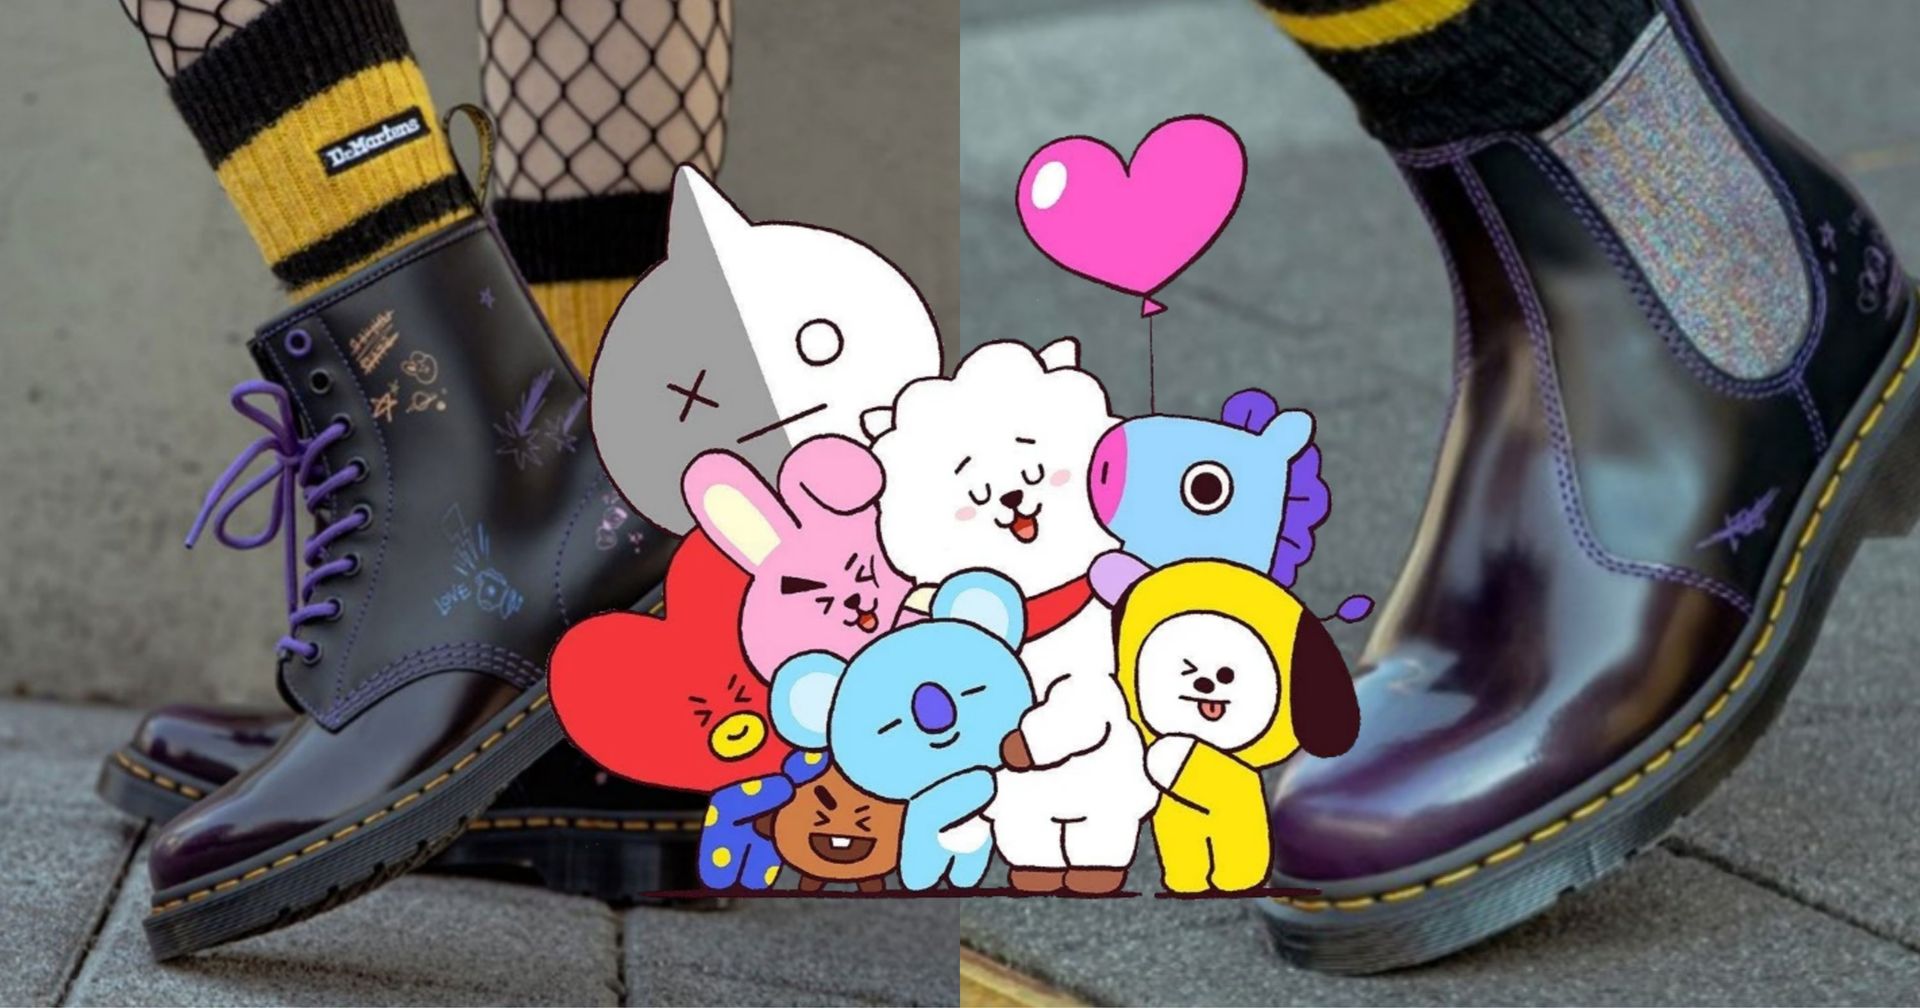 Dr. Martens Drops Collaboration With LINE FRIENDS' BT21 - Koreaboo